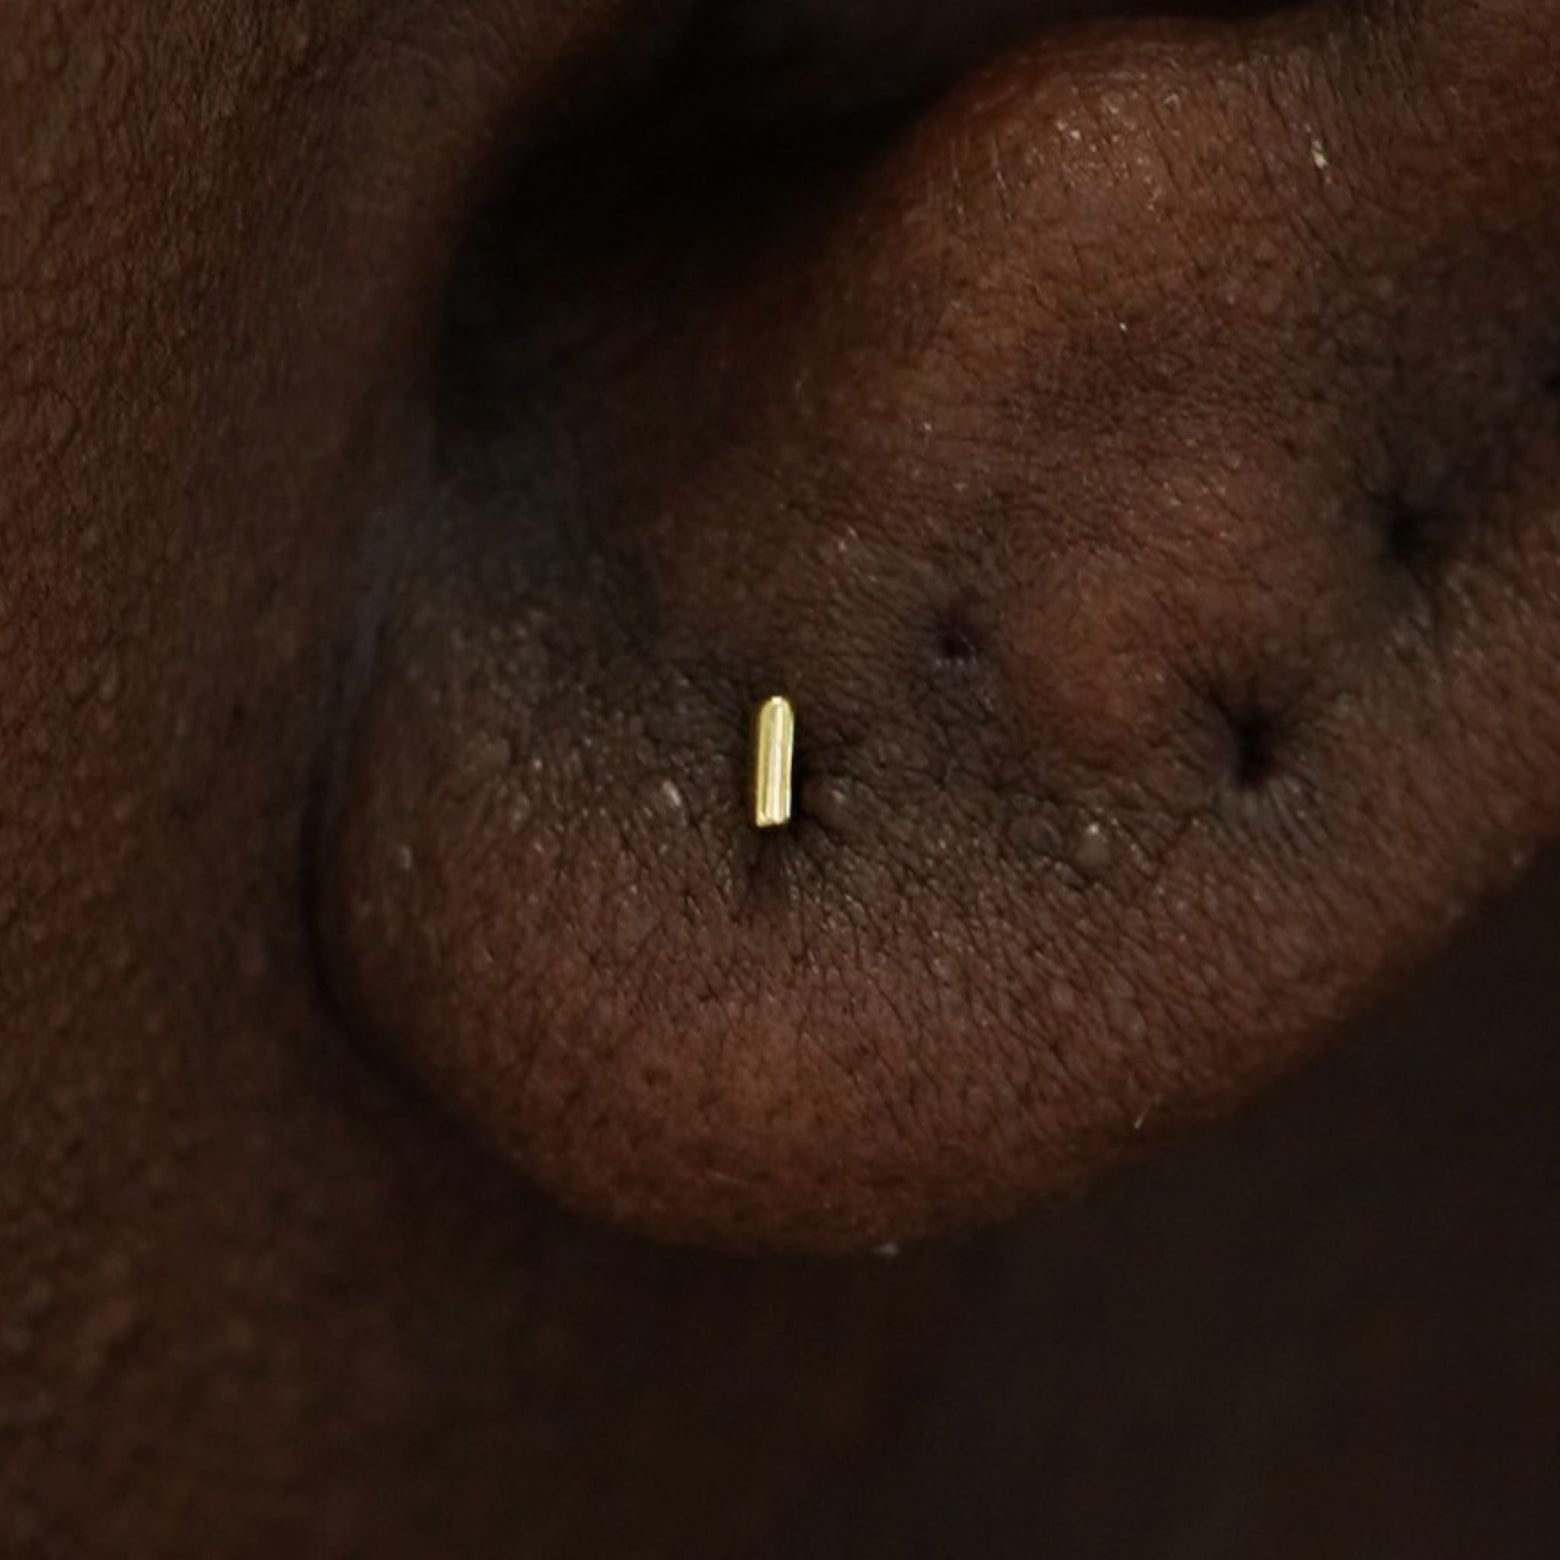 Close up view of a model's ear wearing a 14k gold Small Line Earring